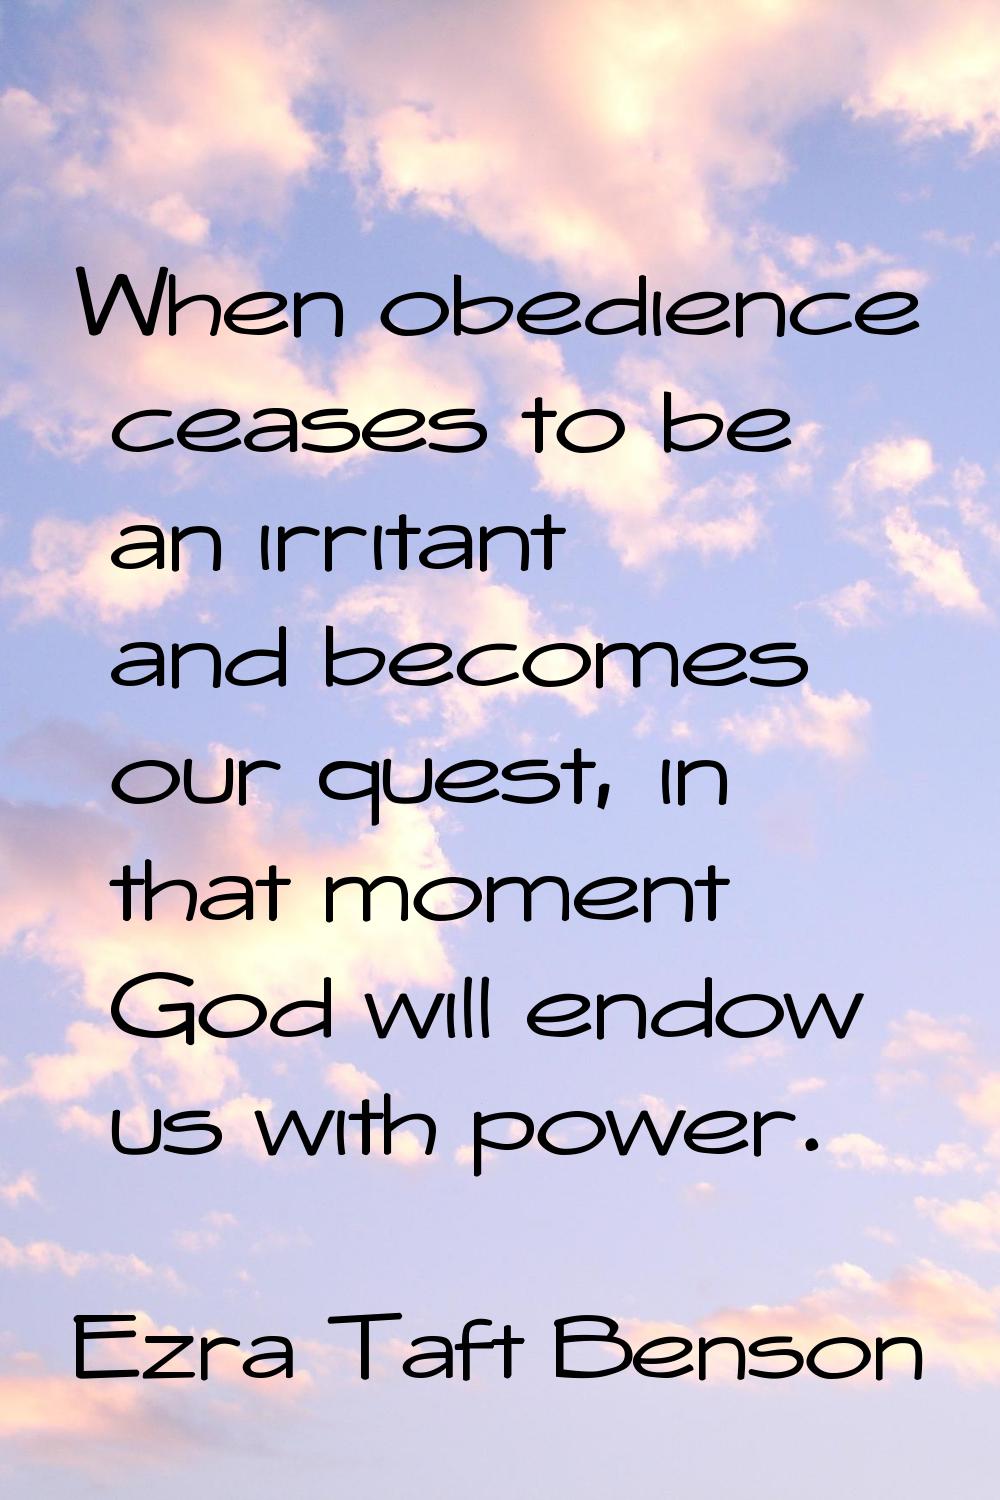 When obedience ceases to be an irritant and becomes our quest, in that moment God will endow us wit